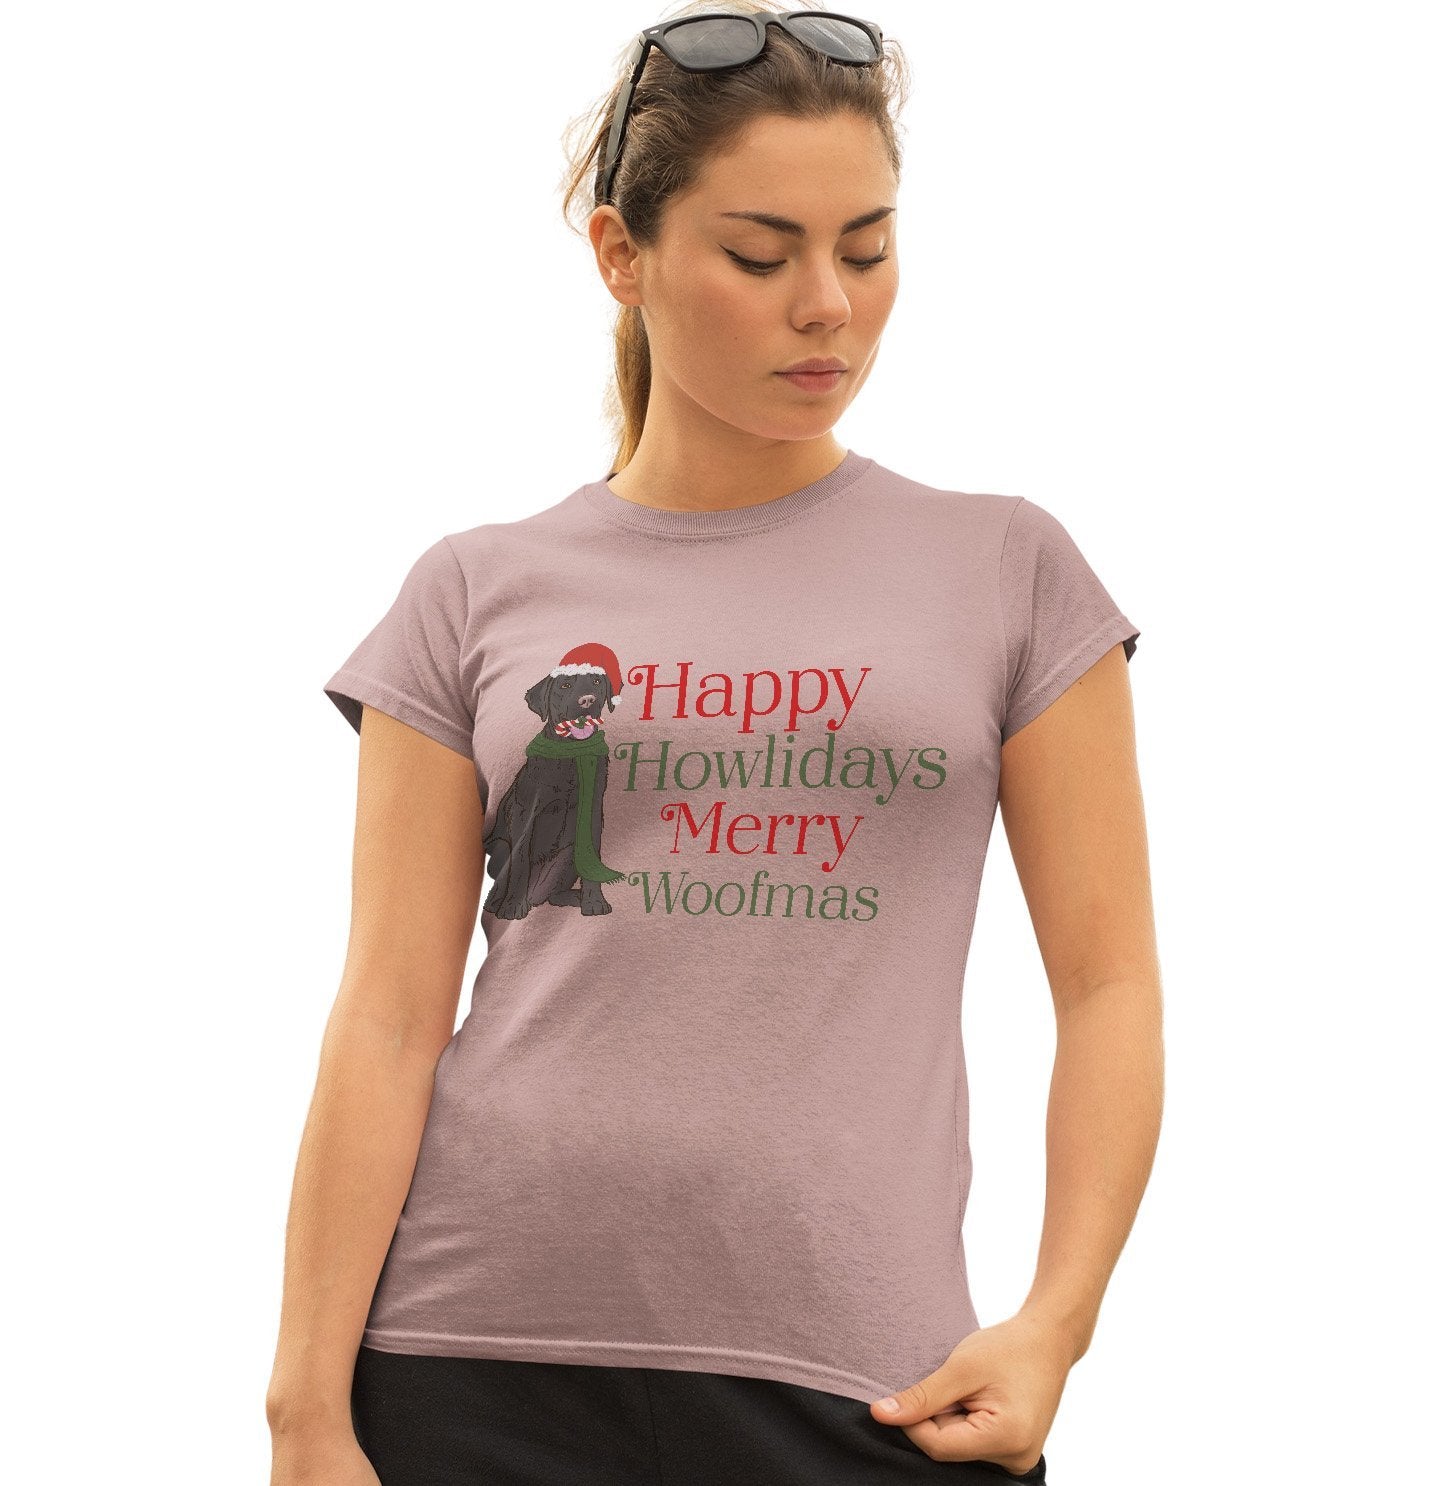 Labradors.com - Merry Woofmas Black Lab - Women's Fitted T-Shirt